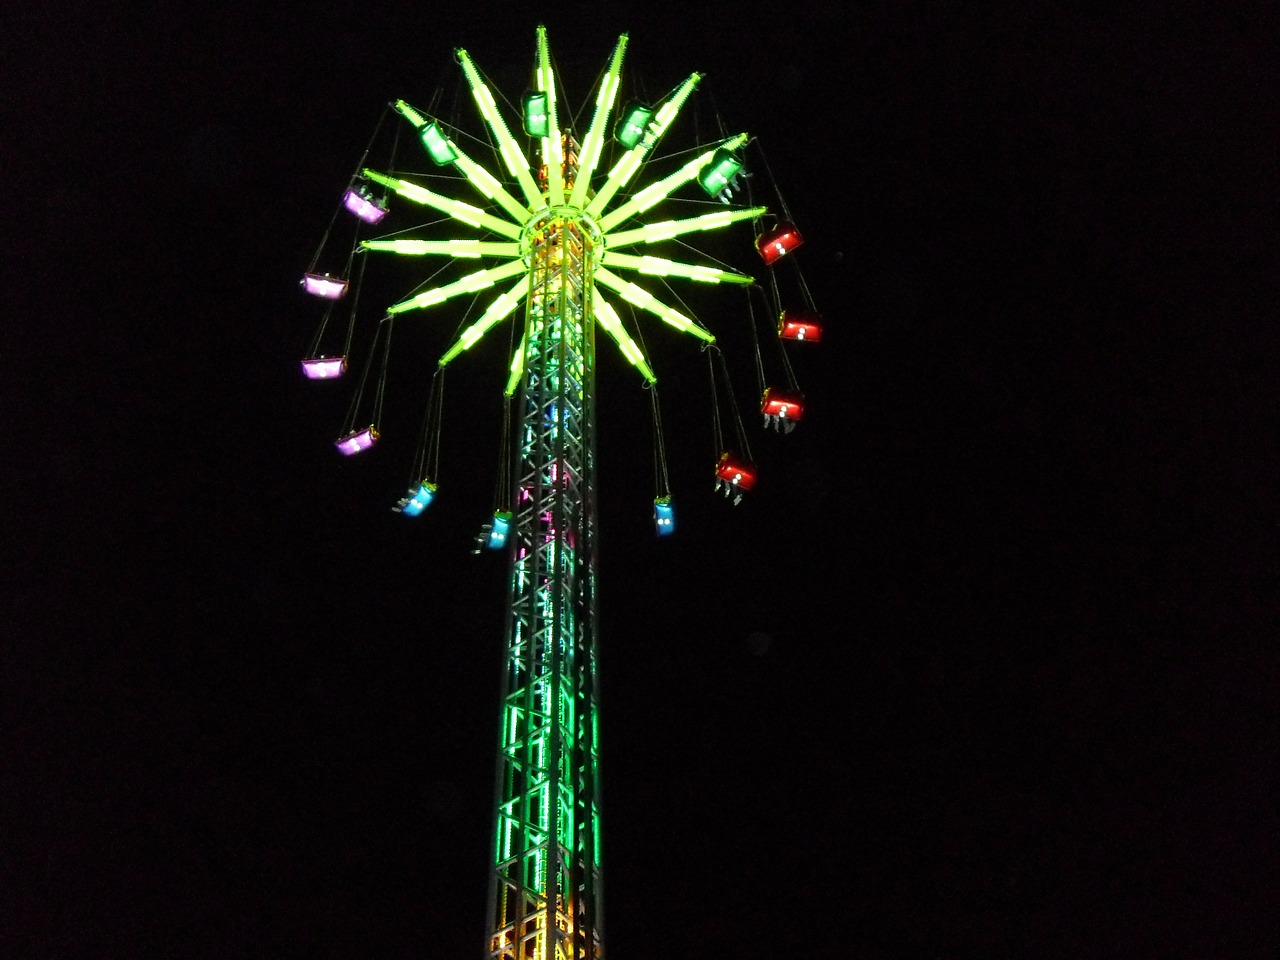 Download free photo of Funfair,summer,night,free pictures, free photos ...